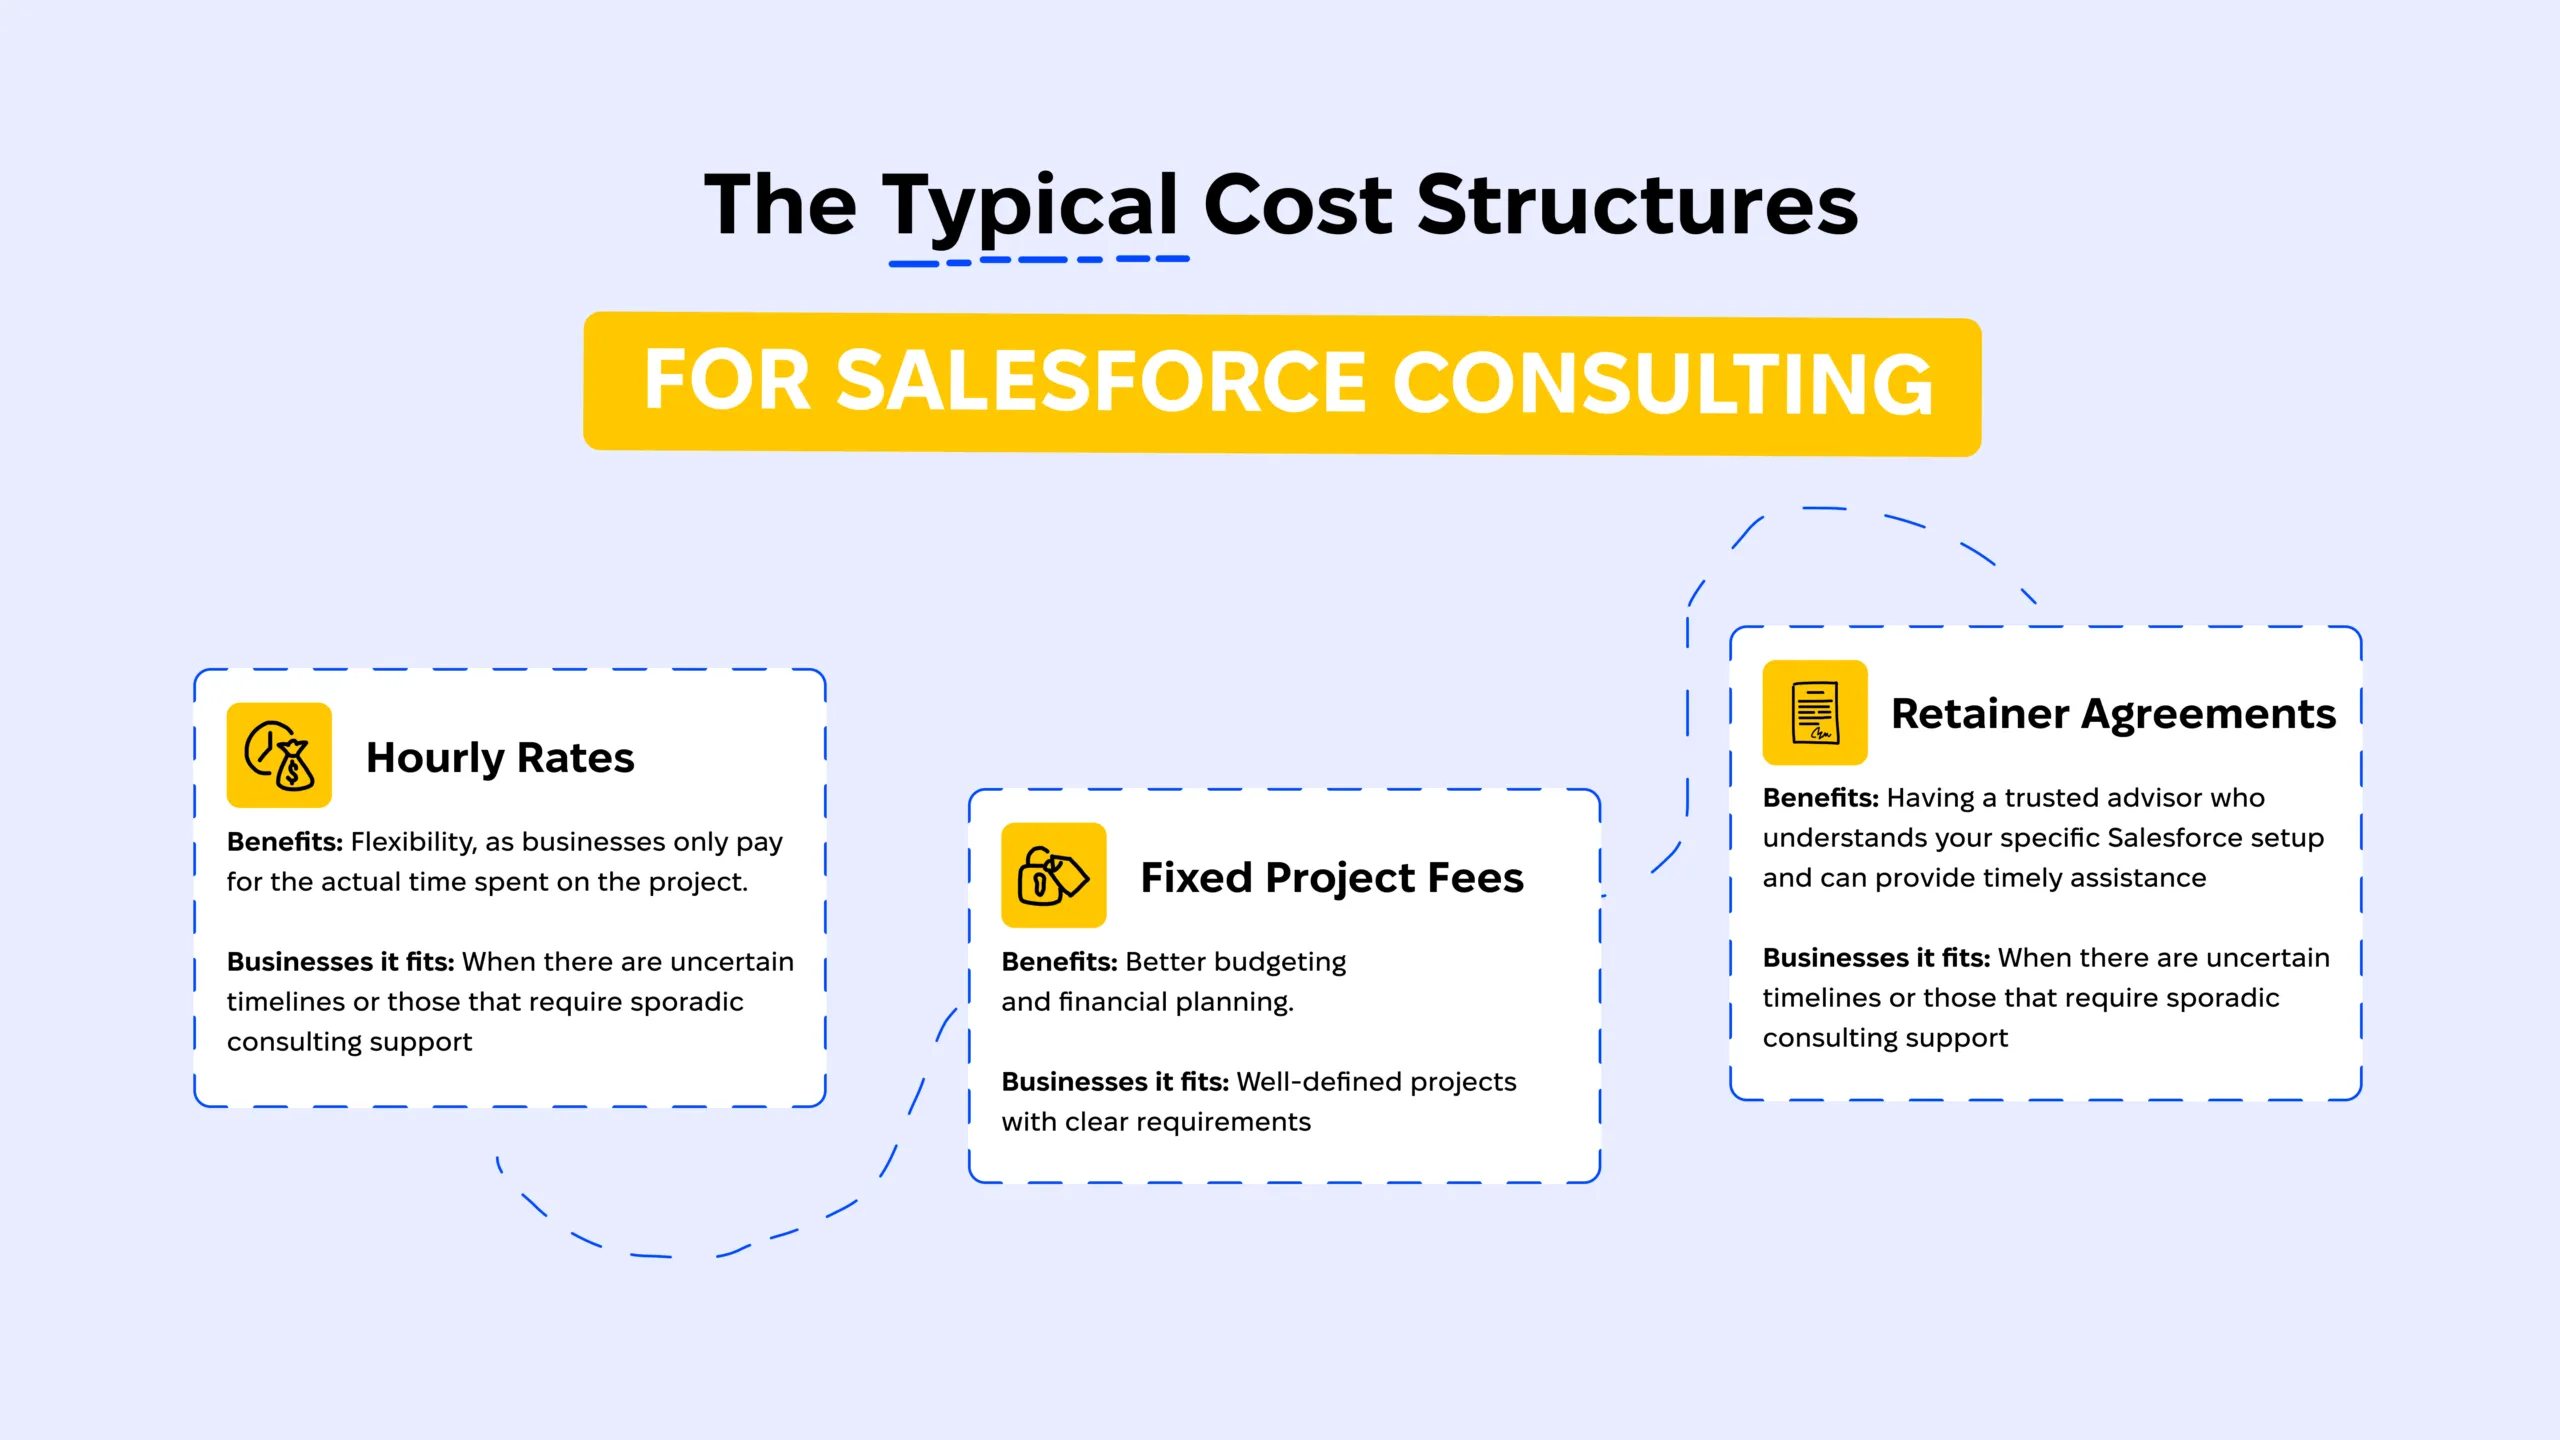 The typical cost structures for Salesforce consulting